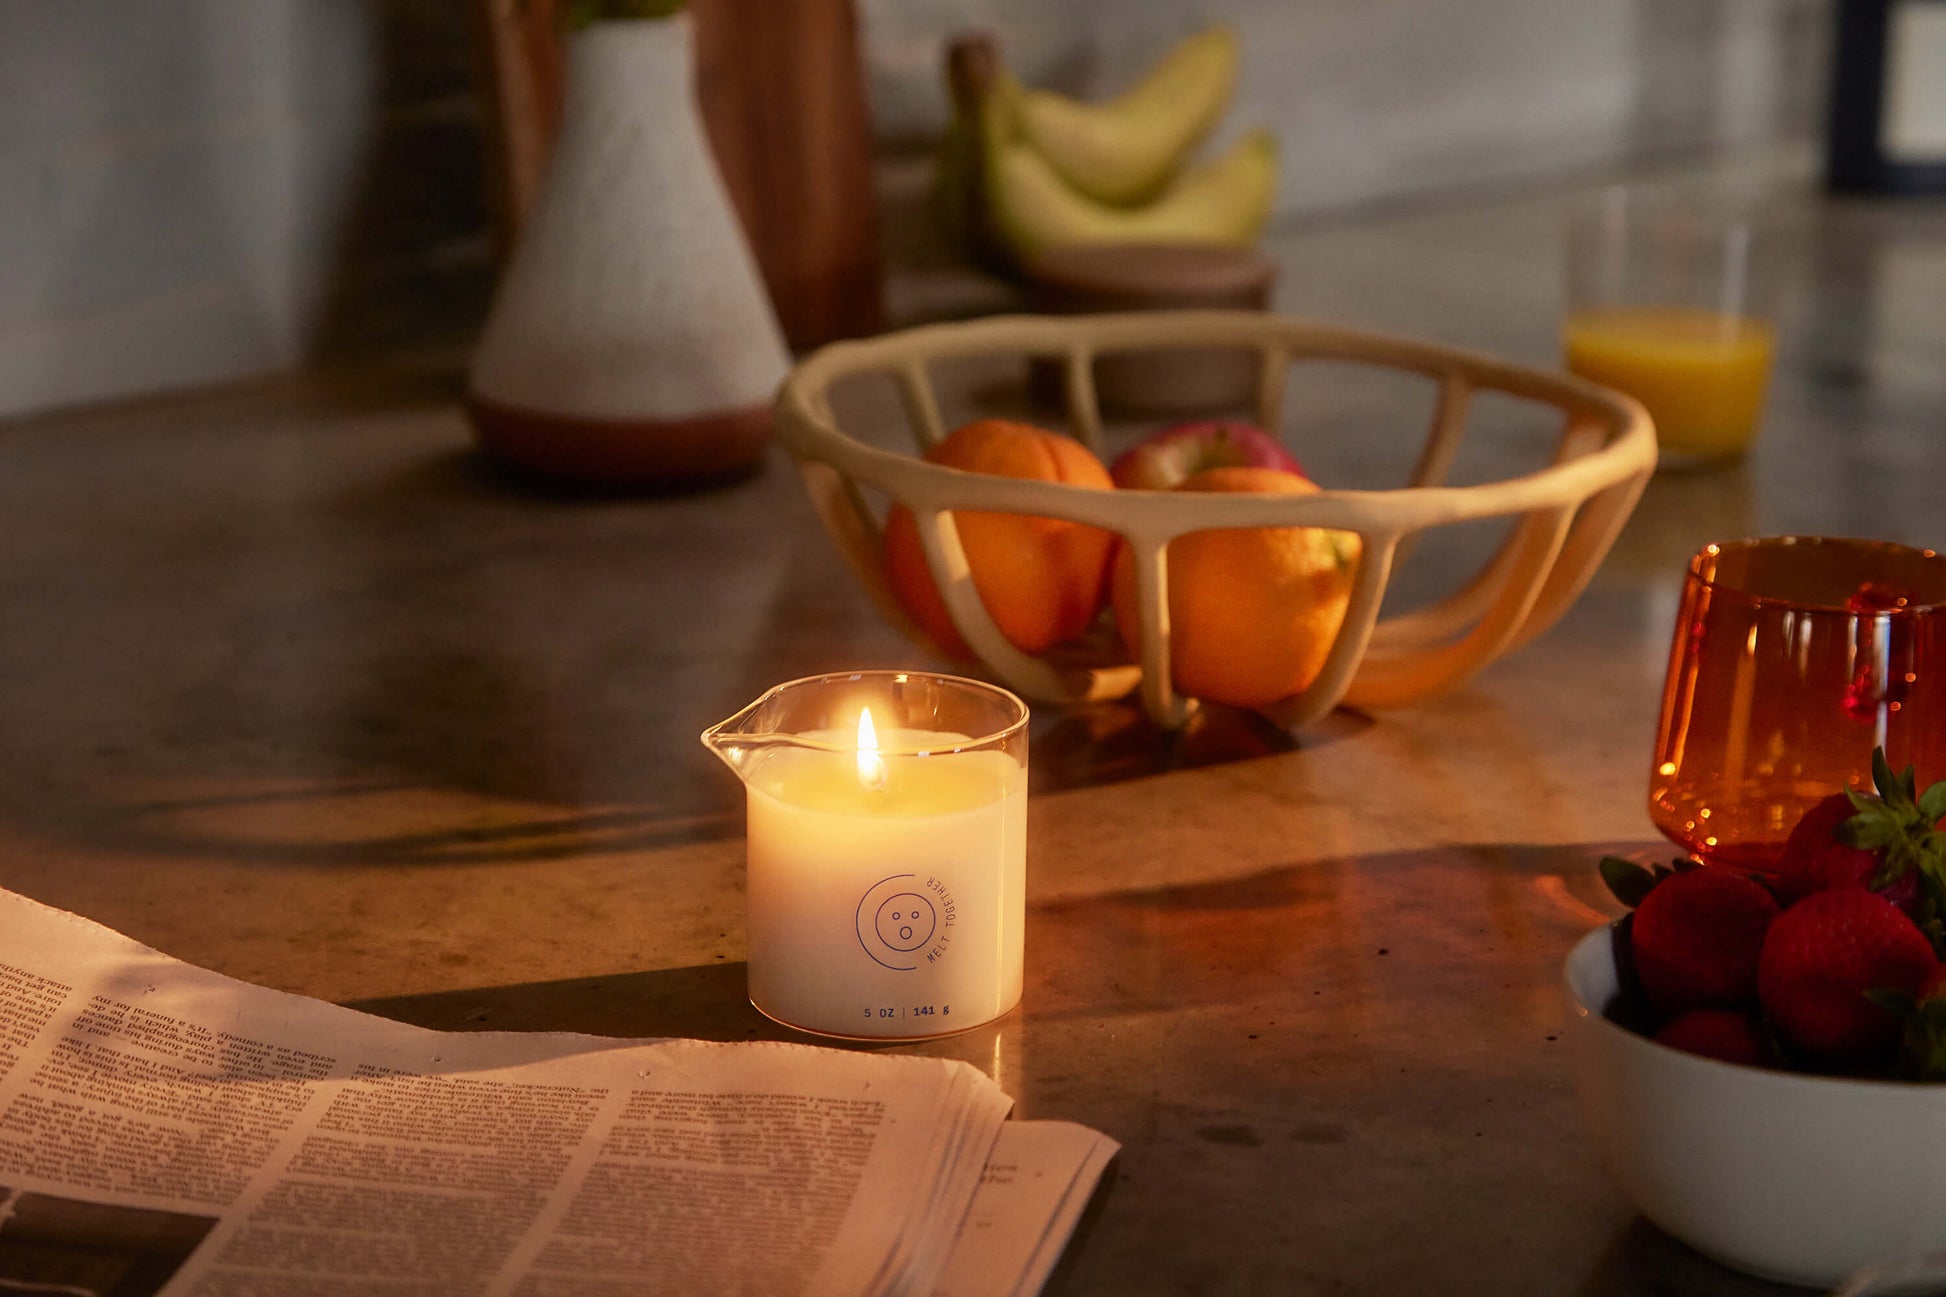 Melt Together | Dame Melt Together Massage Oil Candle Lighted on top of a dinner table next to a newspaper